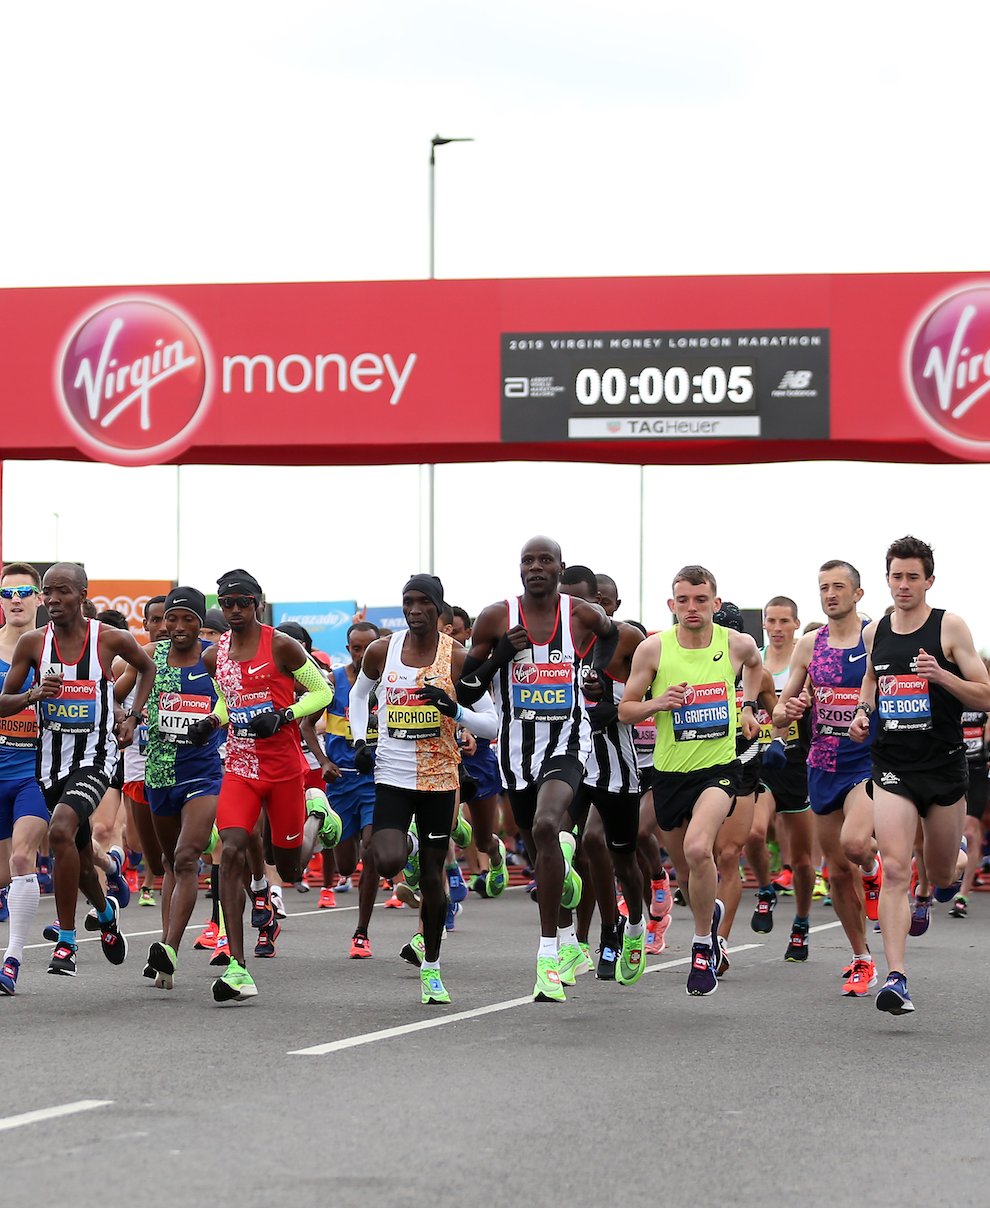 The 2021 London Marathon will act as Olympic trial for GB athletes 